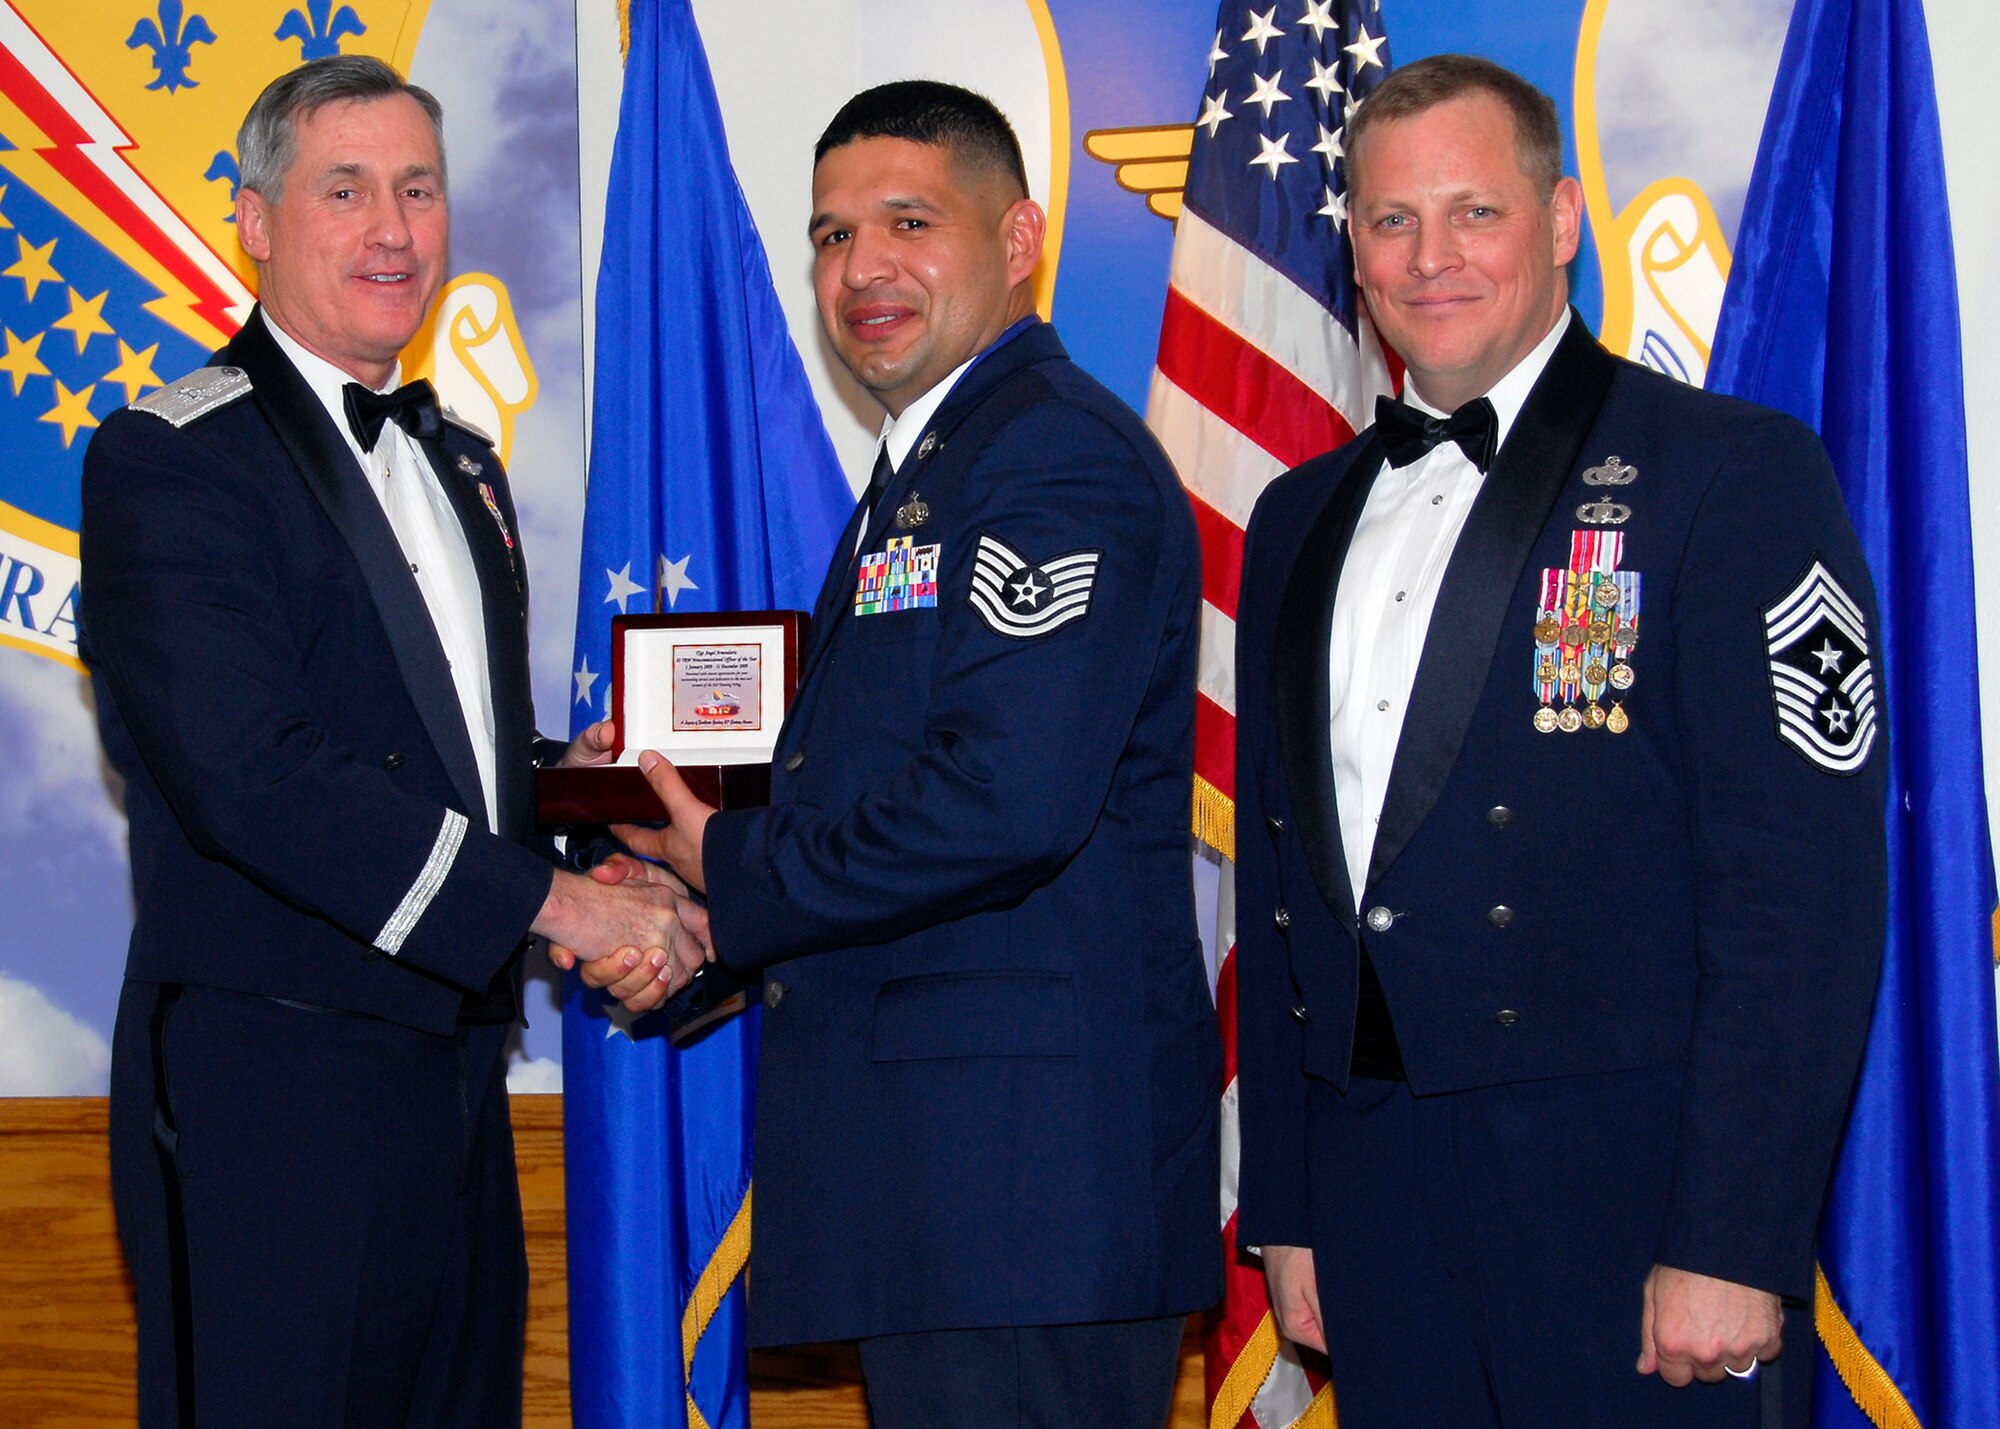 Brig. Gen. O.G. Mannon, 82nd Training Wing commander, presents Tech. Sgt. Angel Armendariz, 364th Training Squadron, with the NCO of the Year award March 5 during the 2009 82nd TRW Annual Awards banquet. Also pictured is wing Command Chief, Chief Master Sgt. Kenneth Sallinger. (U.S. Air Force photo/Harry Tonemah) 